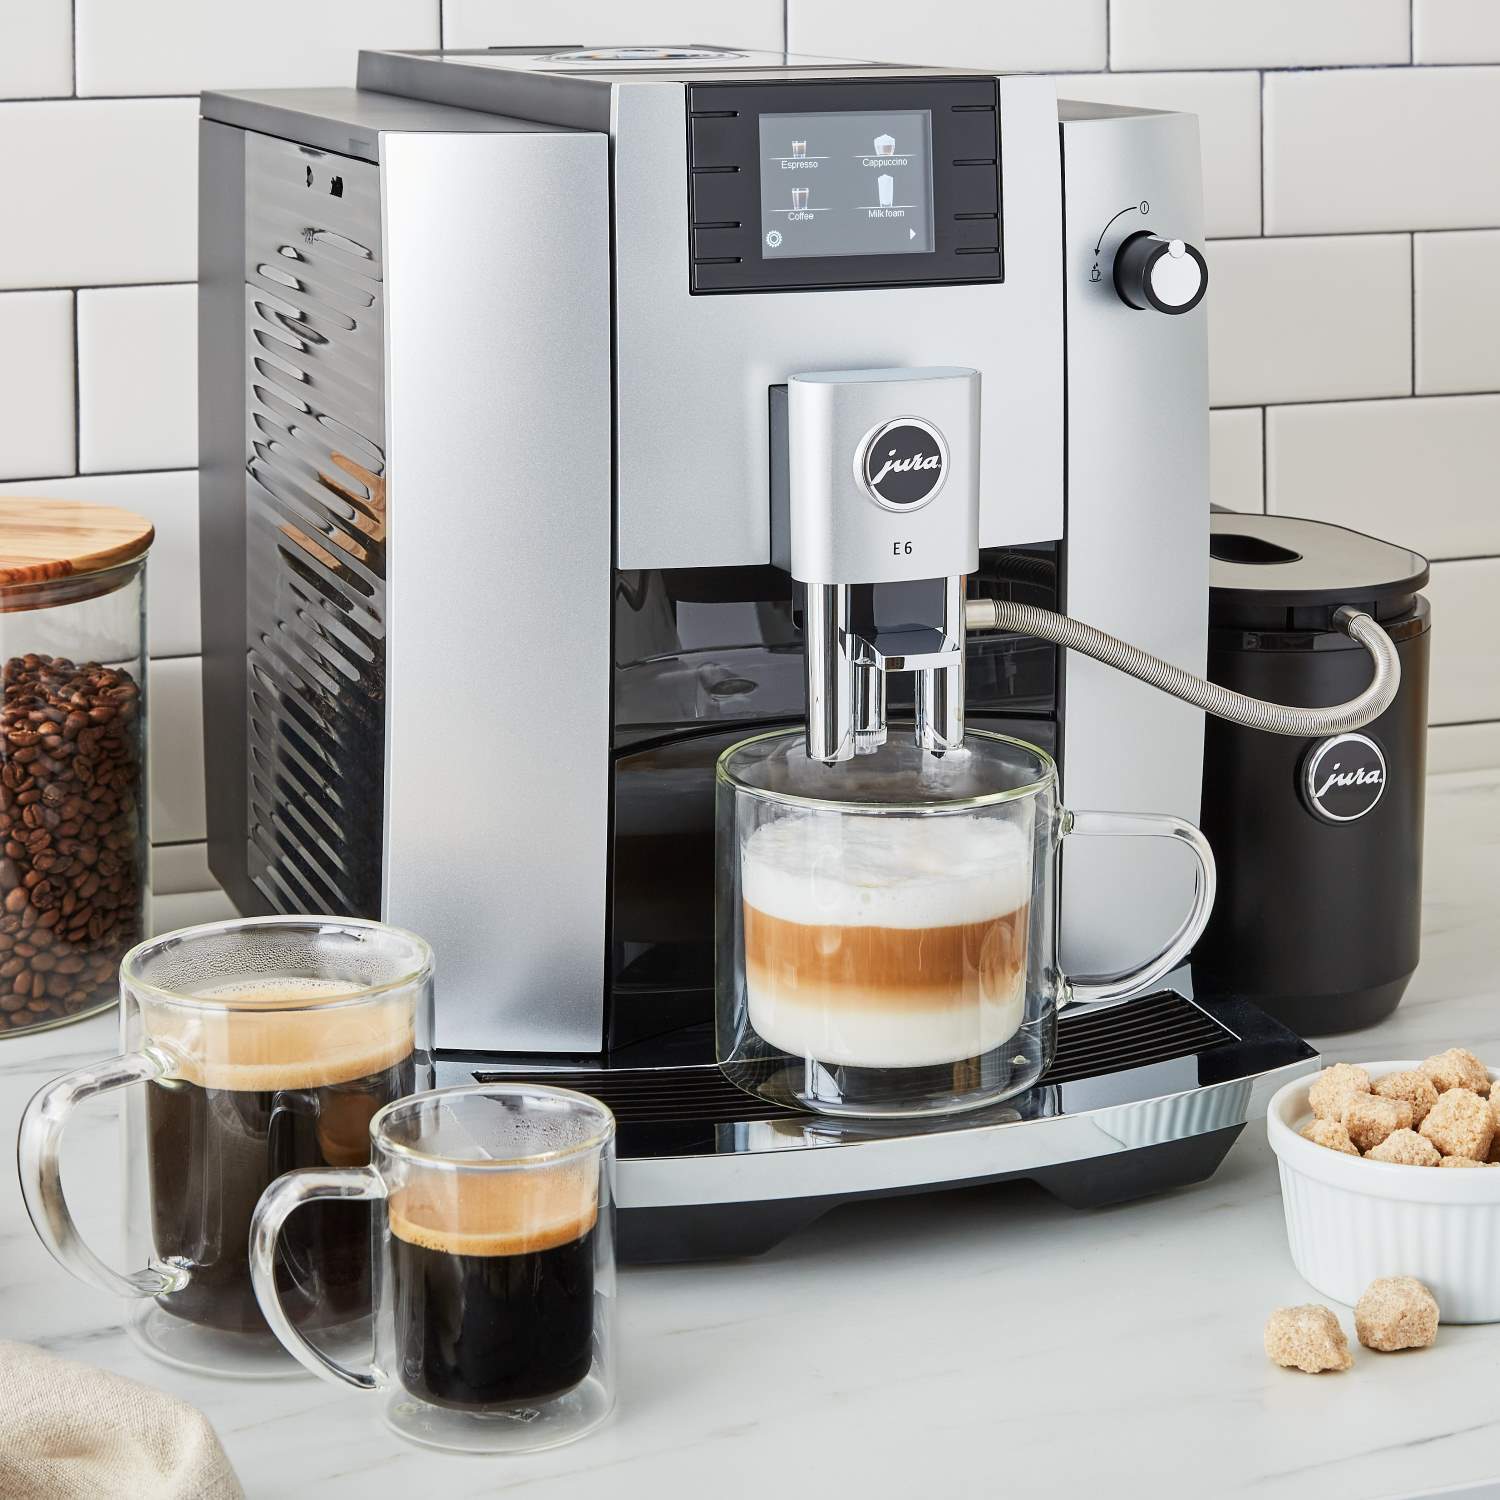 espresso machine buying guide, what to look for in an espresso machine, jura espresso  machines